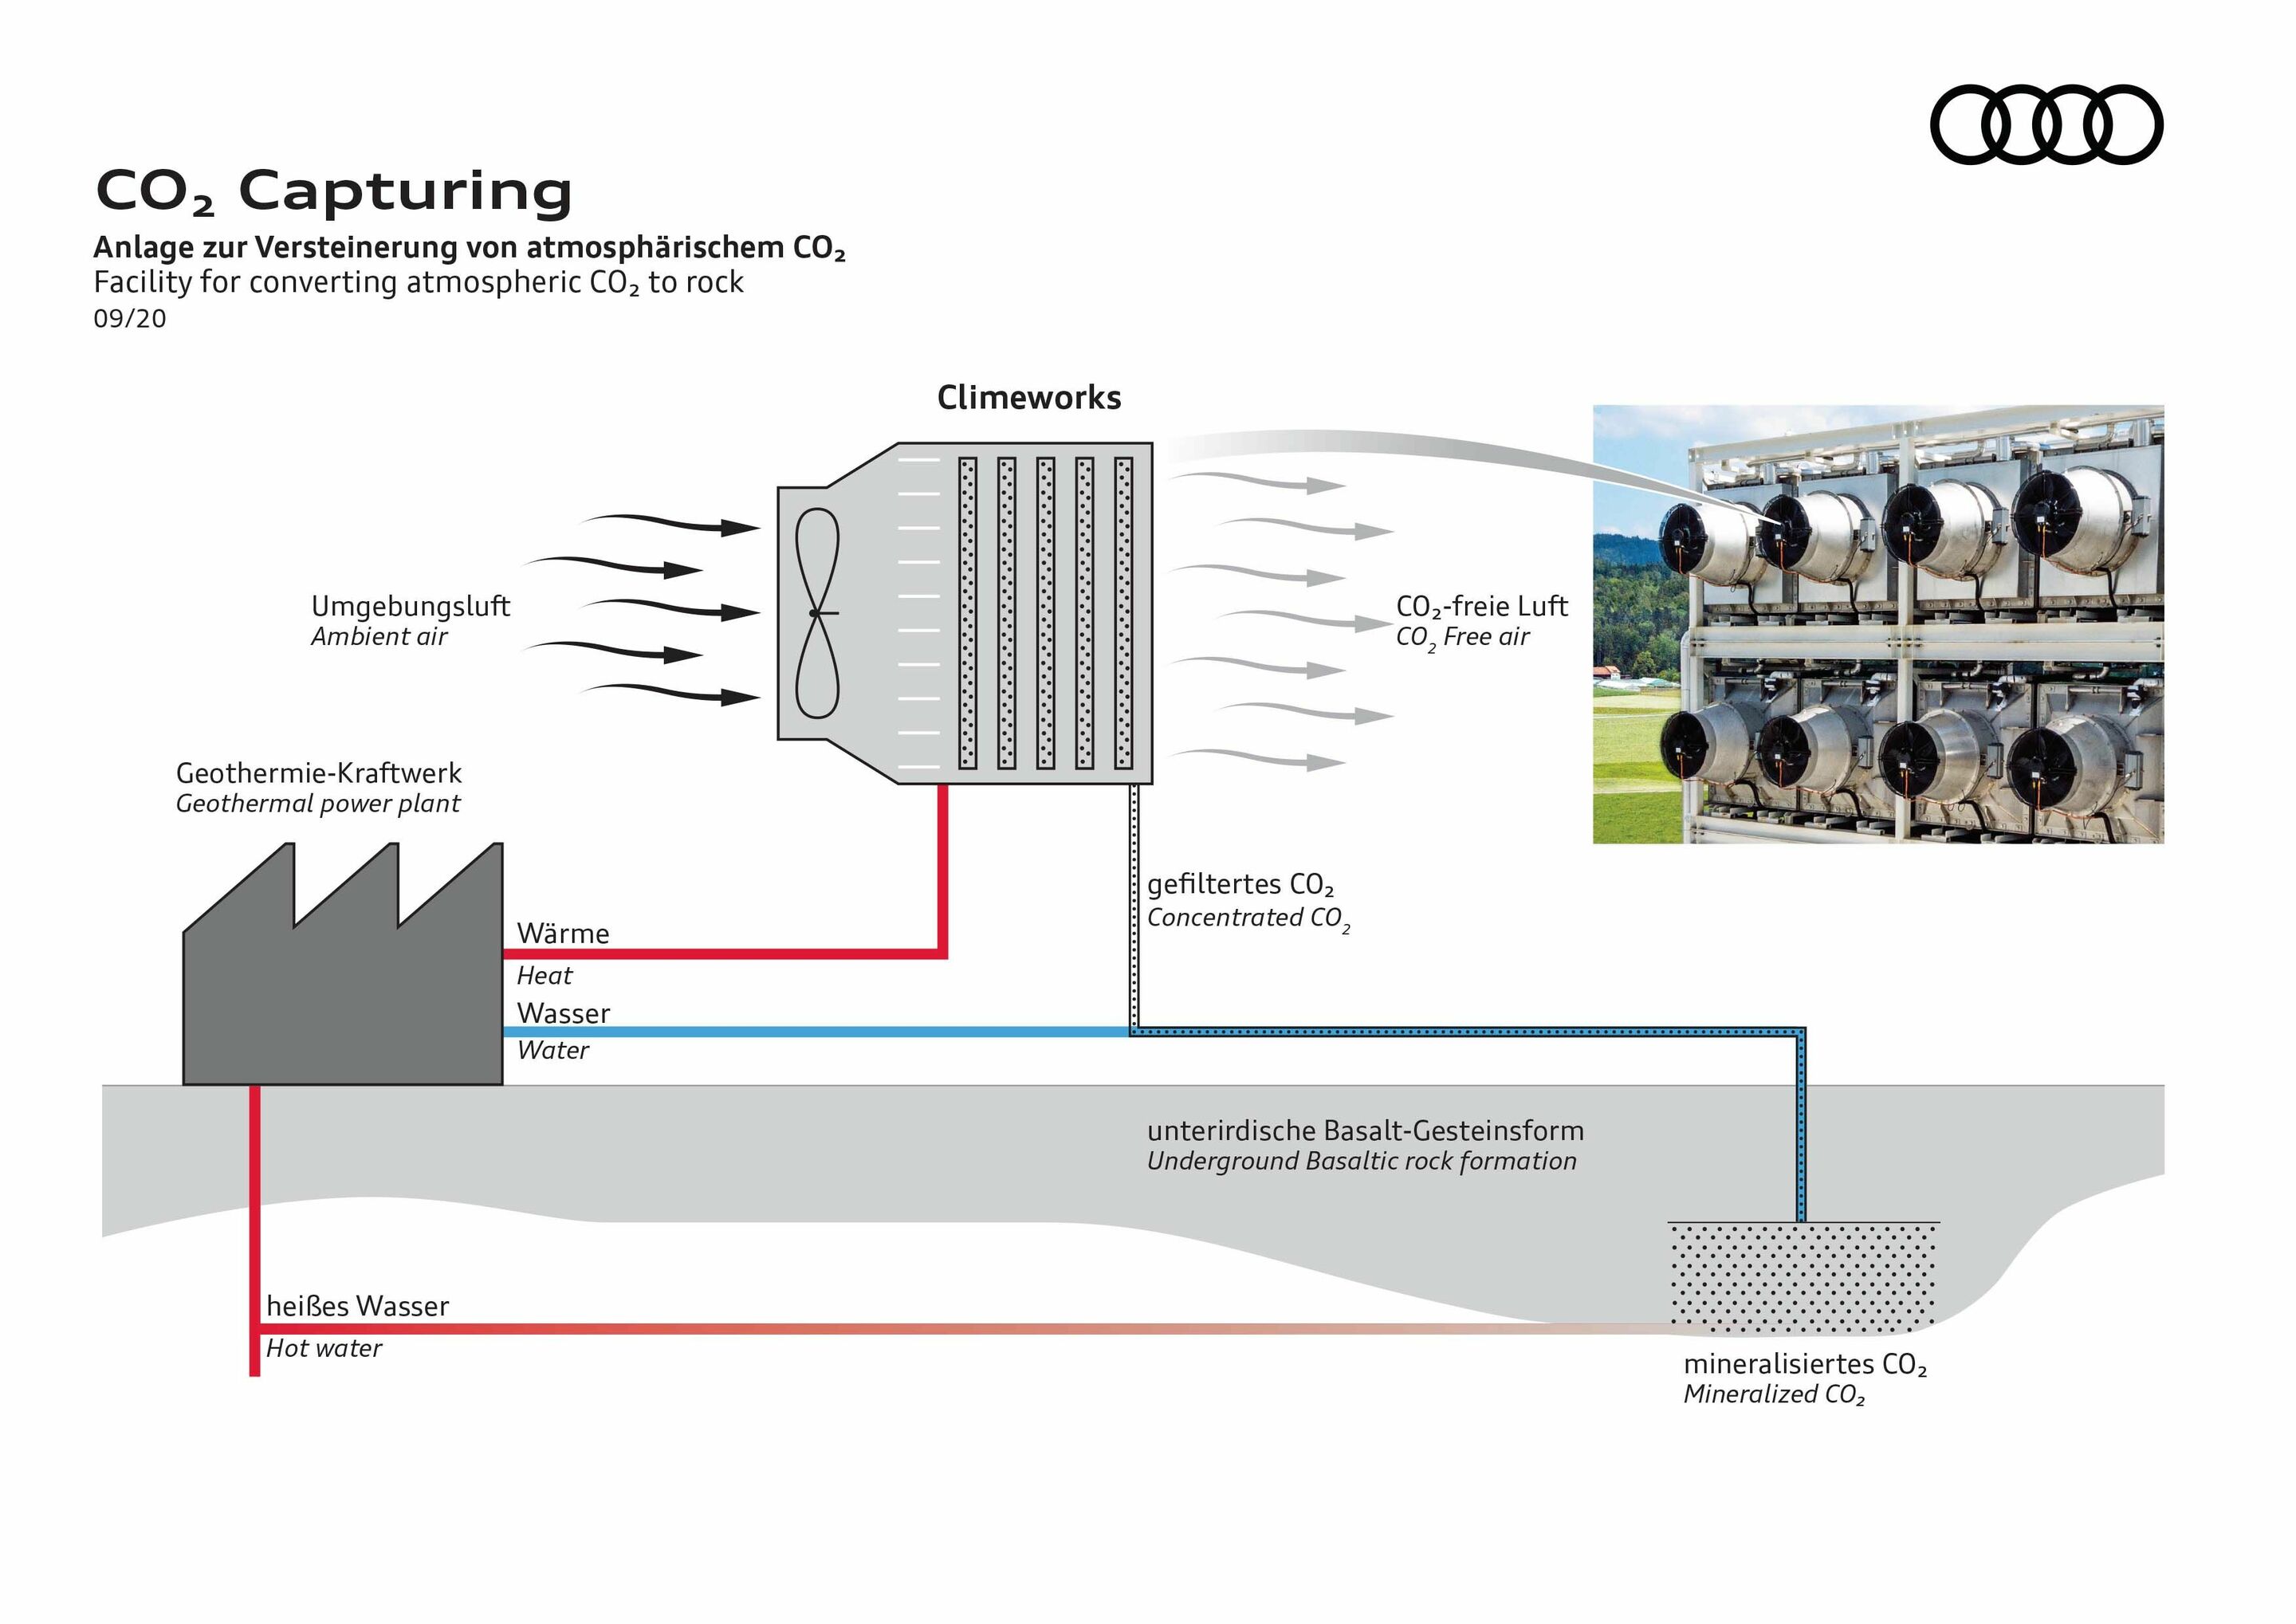 In depth: Audi and Climeworks store CO2 from the atmosphere underground